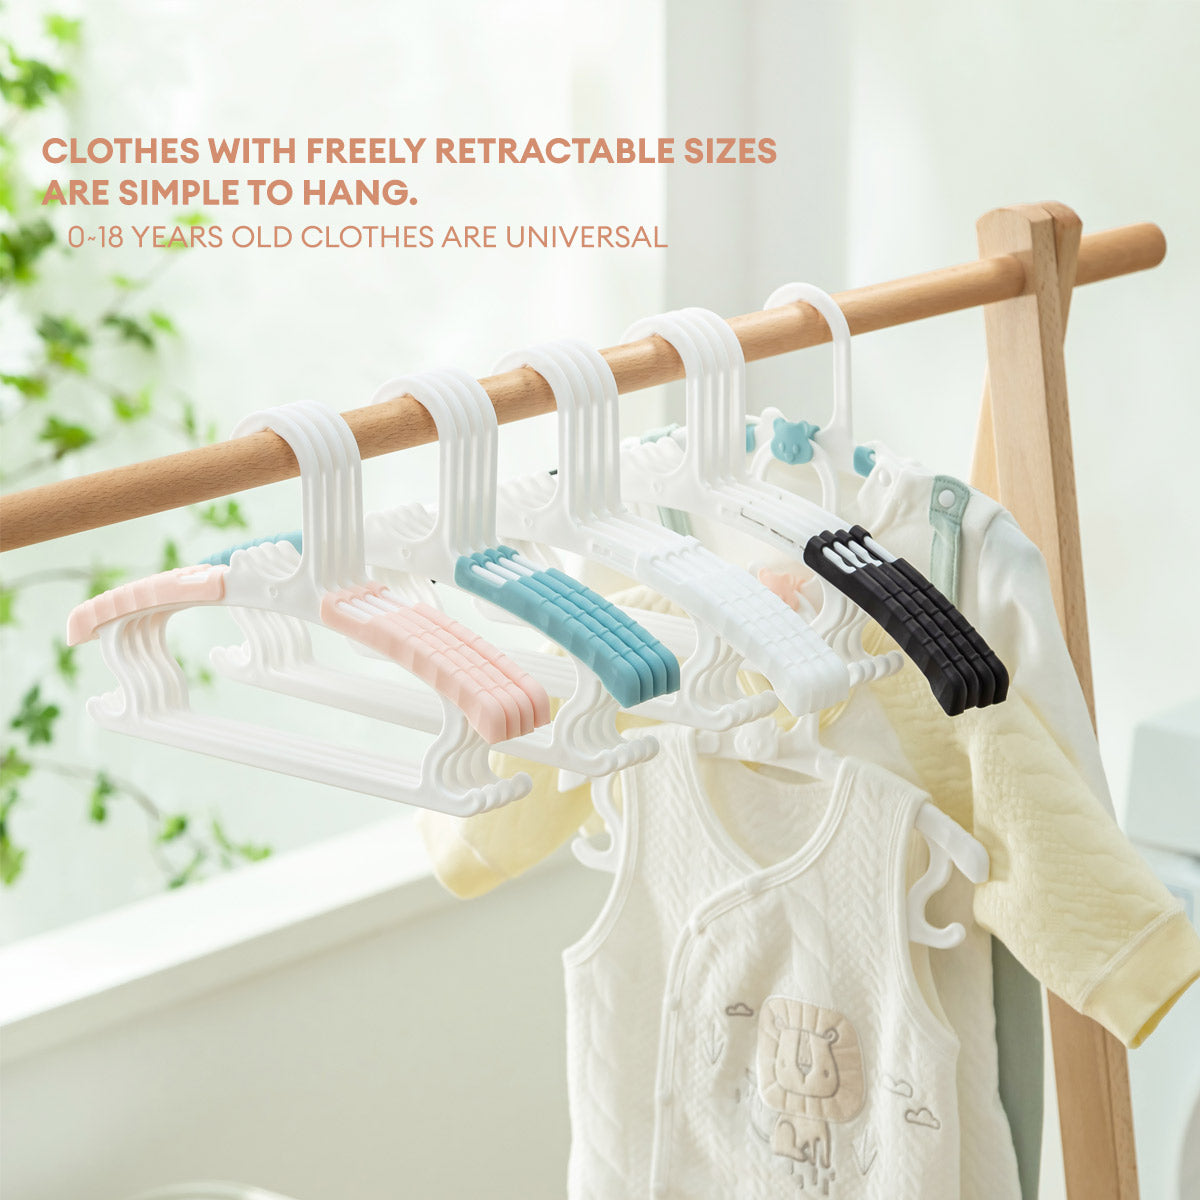 5pcs Blue Baby Clothes Hangers, Children Clothes Racks, Adjustable,  Anti-slip, Multifunctional, Windproof, Suitable For Home Use, Drying And  Storage